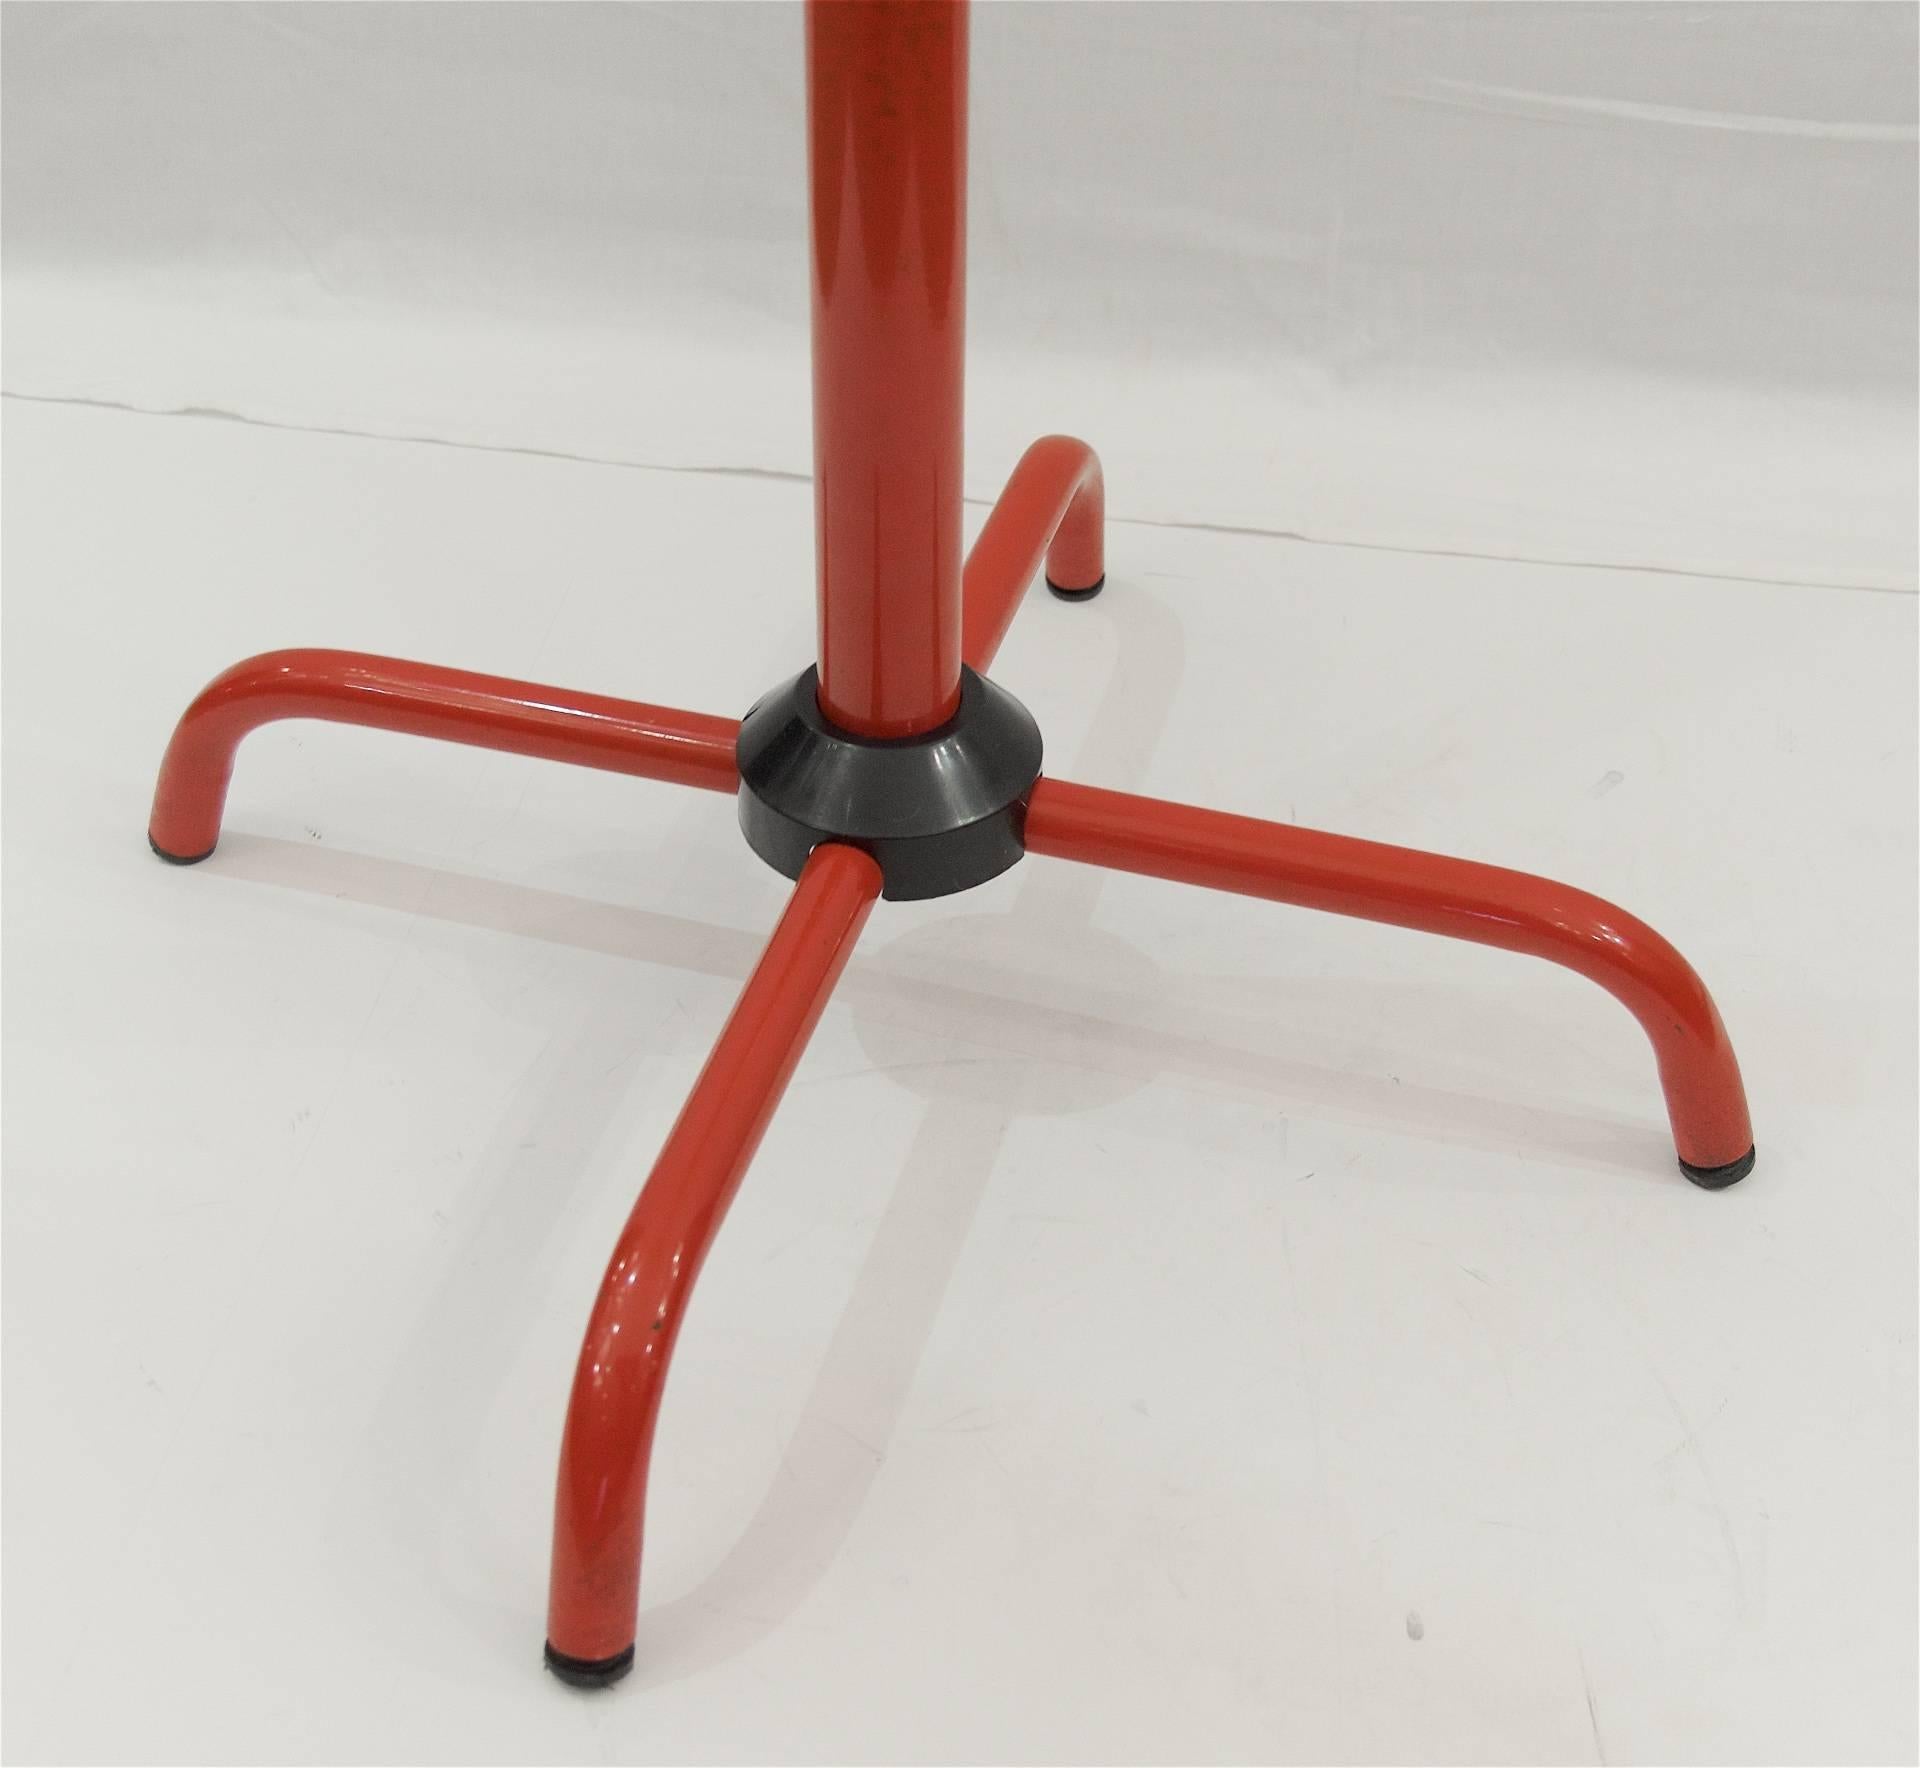 Late 20th Century Red Enamel Italian Coat Rack with Adjustable Arms